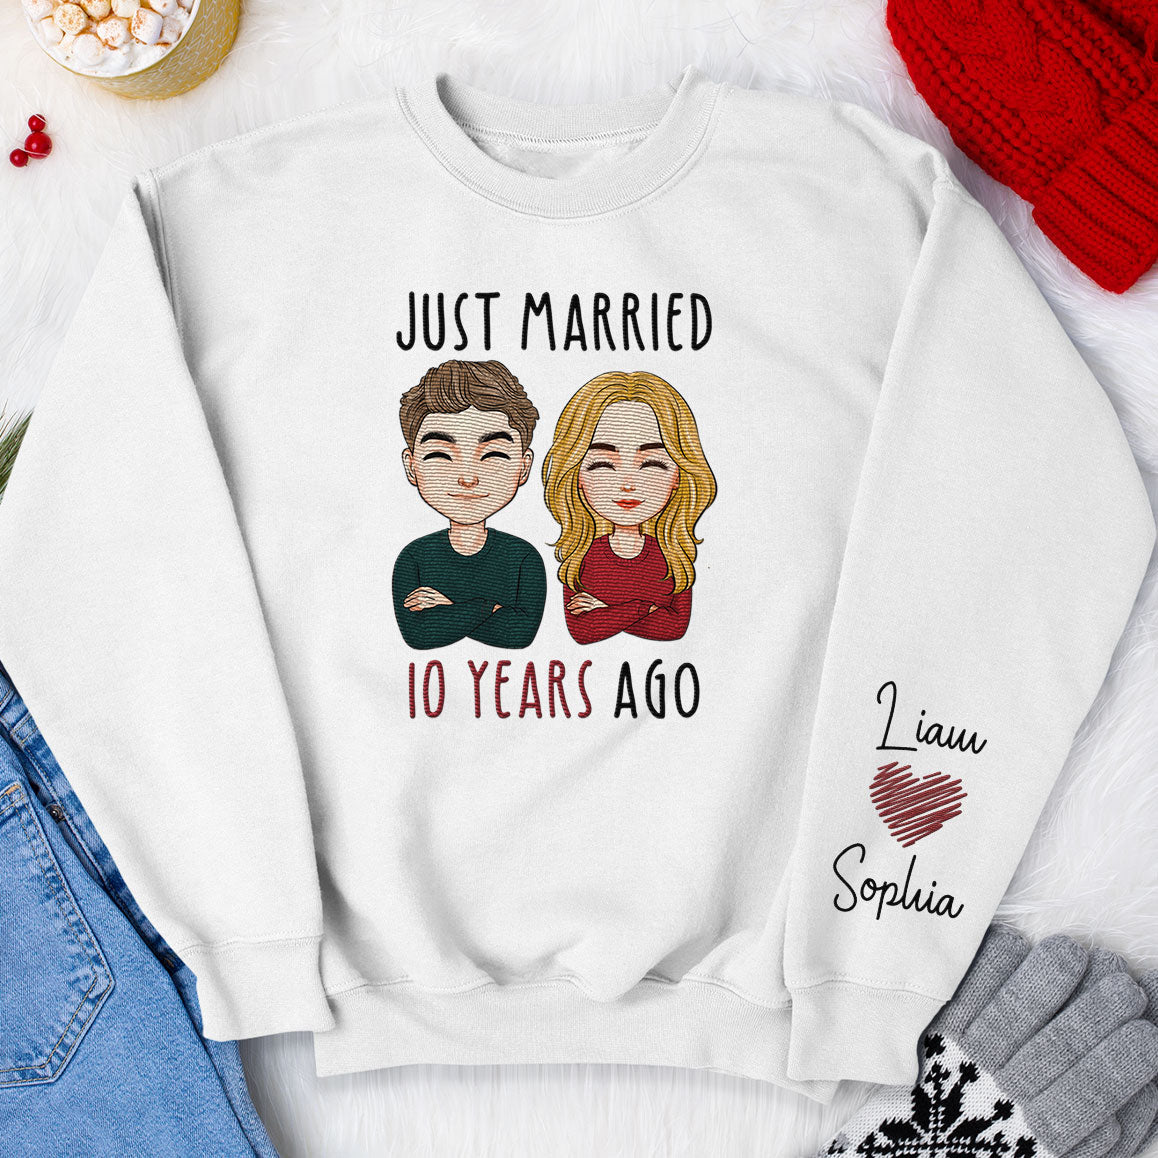 Just Married 10 Years Ago - Personalized Embroidered Shirt